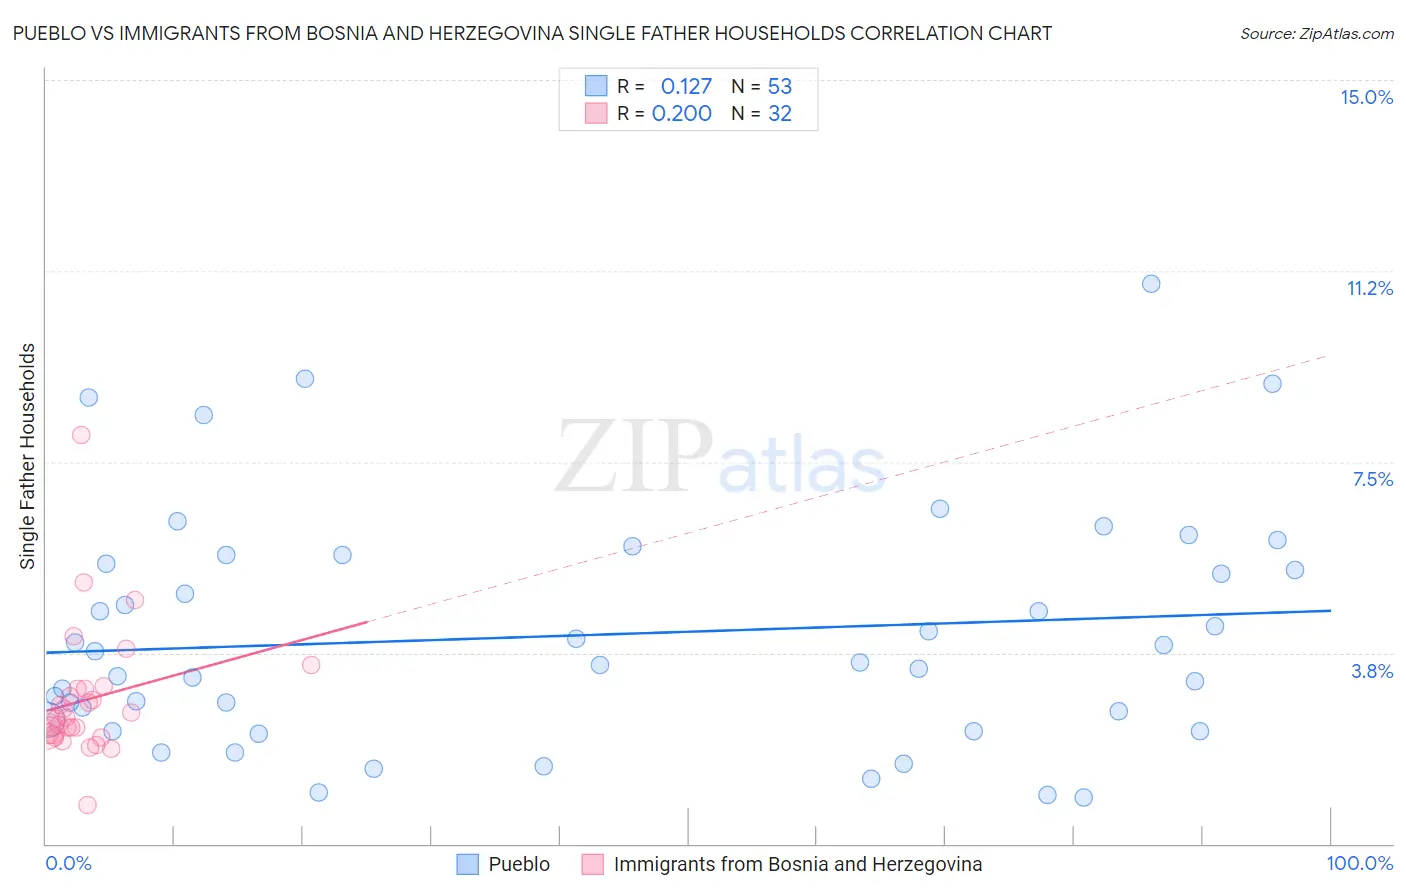 Pueblo vs Immigrants from Bosnia and Herzegovina Single Father Households